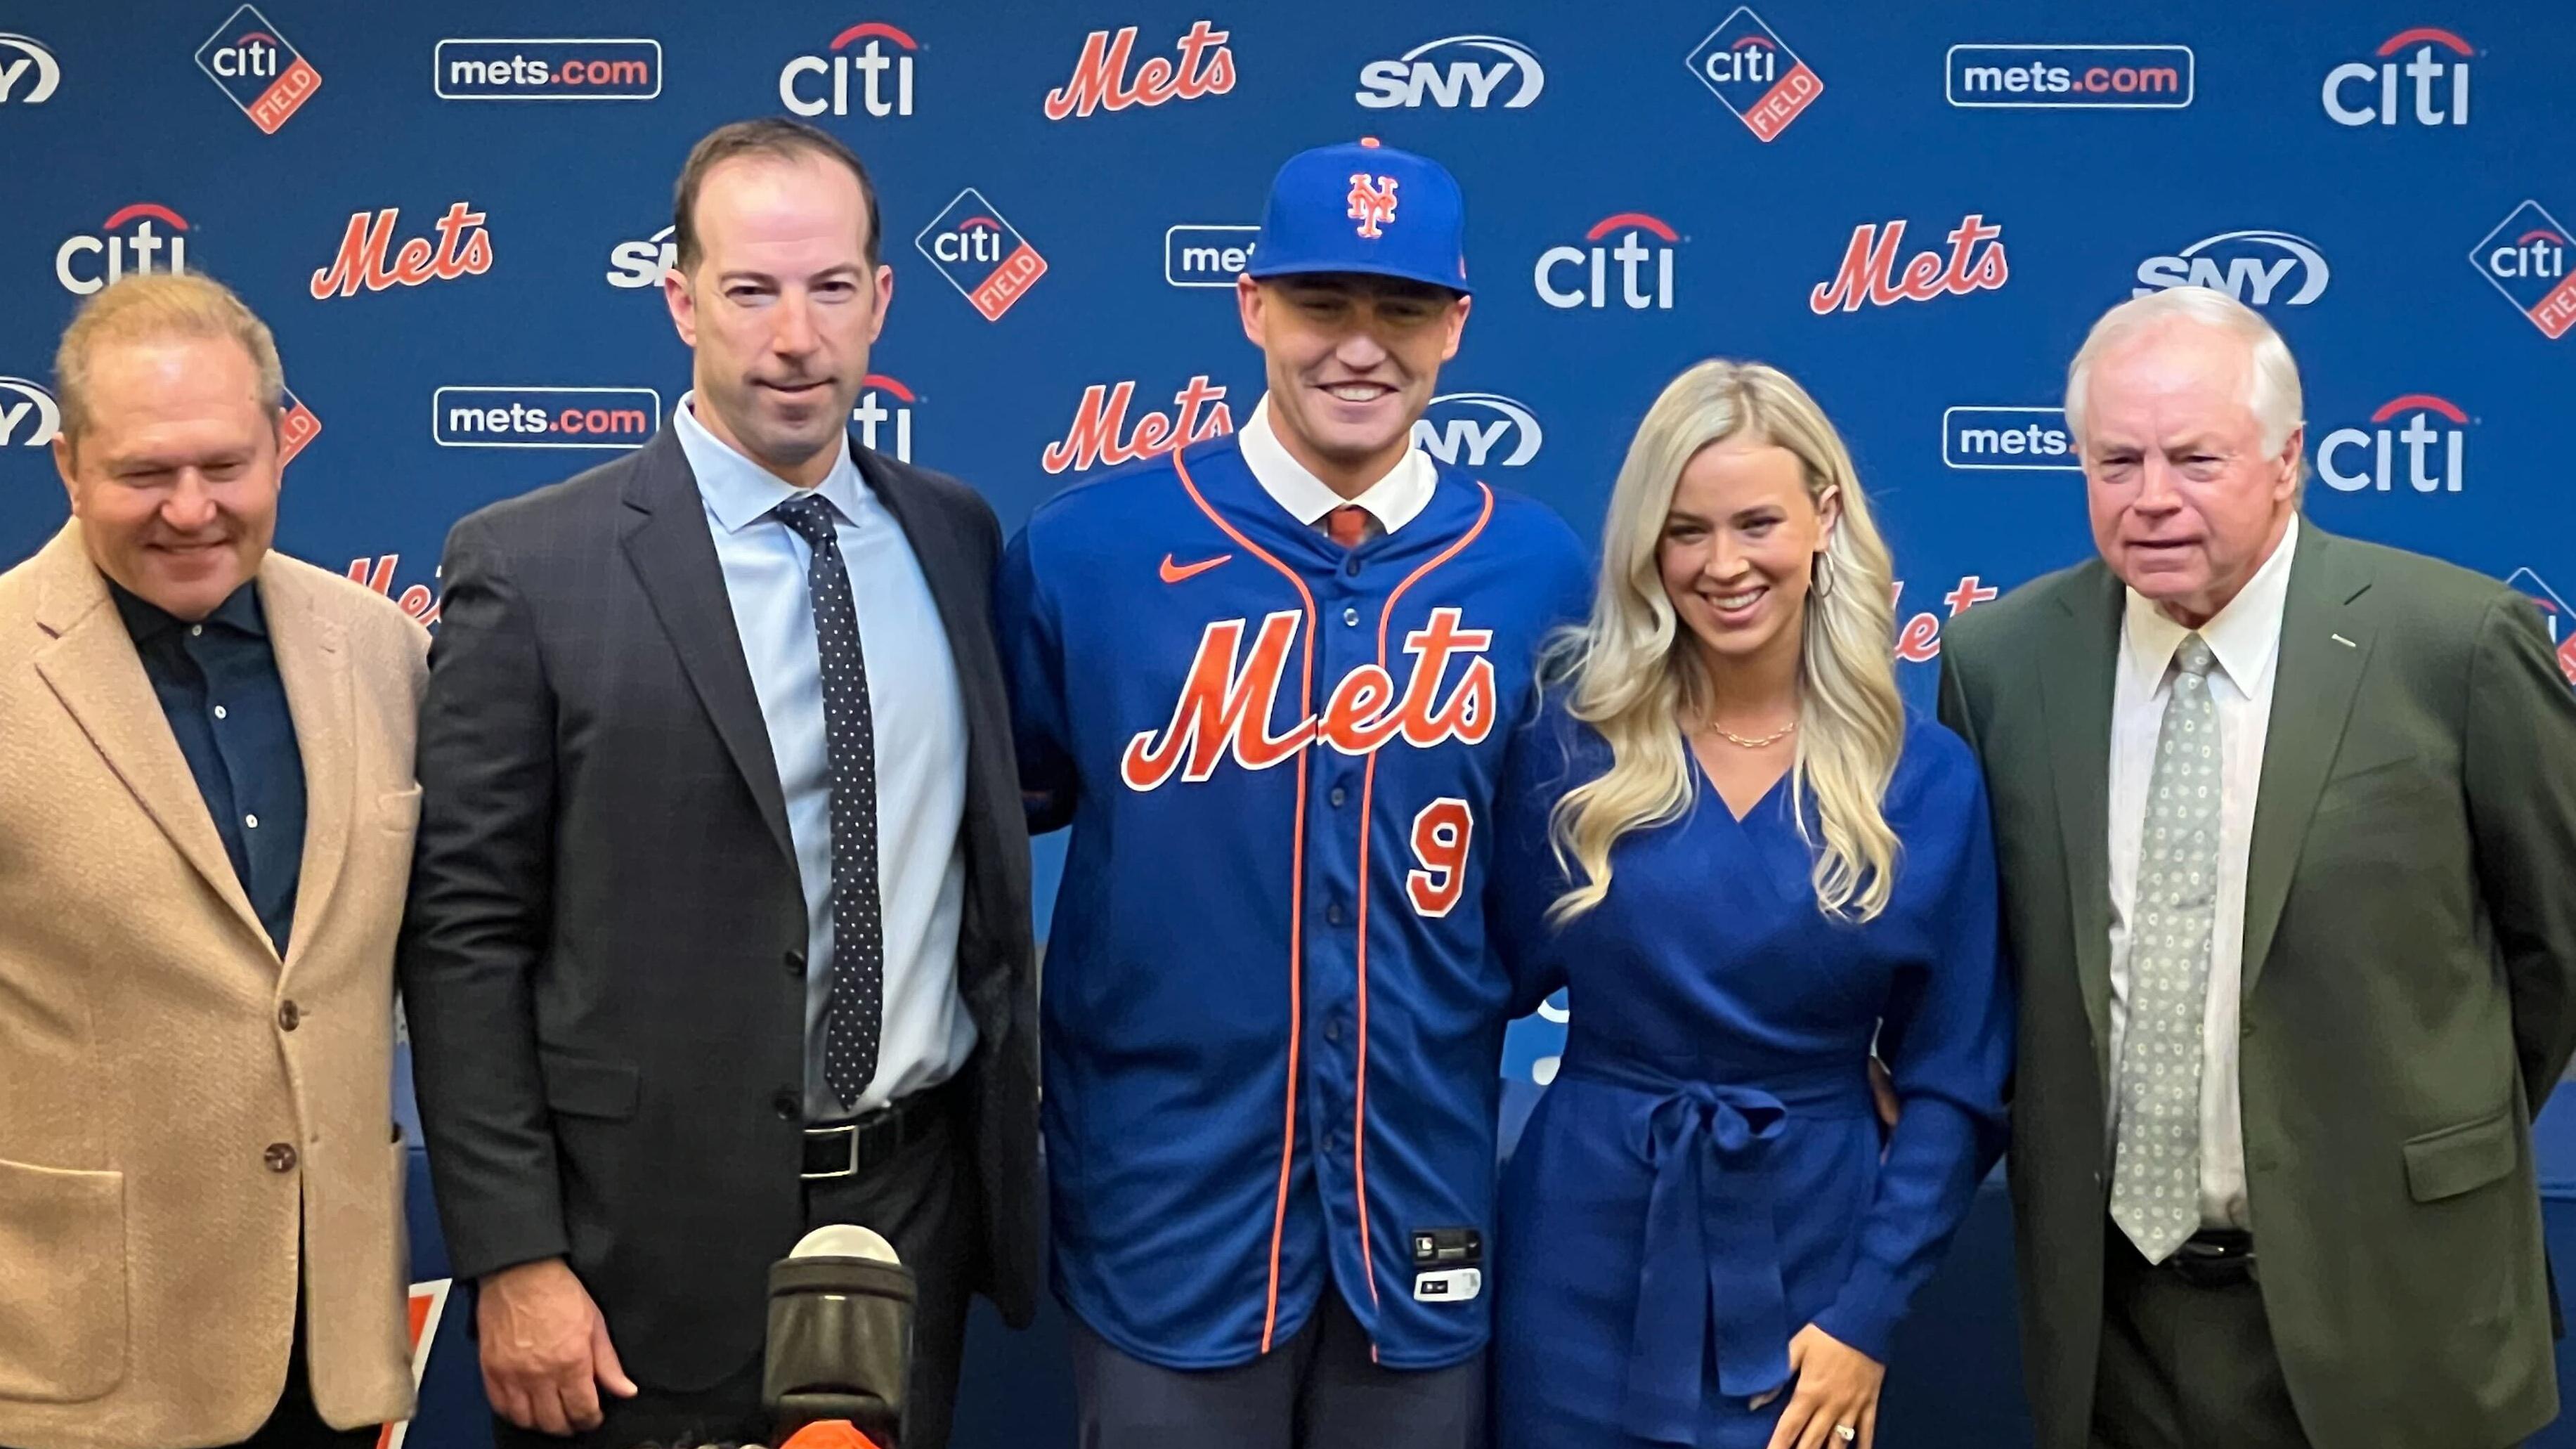 Brandon Nimmo flanked by Scott Boras, Billy Eppler, Chelsea Nimmo, and Buck Showalter / Conor Byrne, SNY